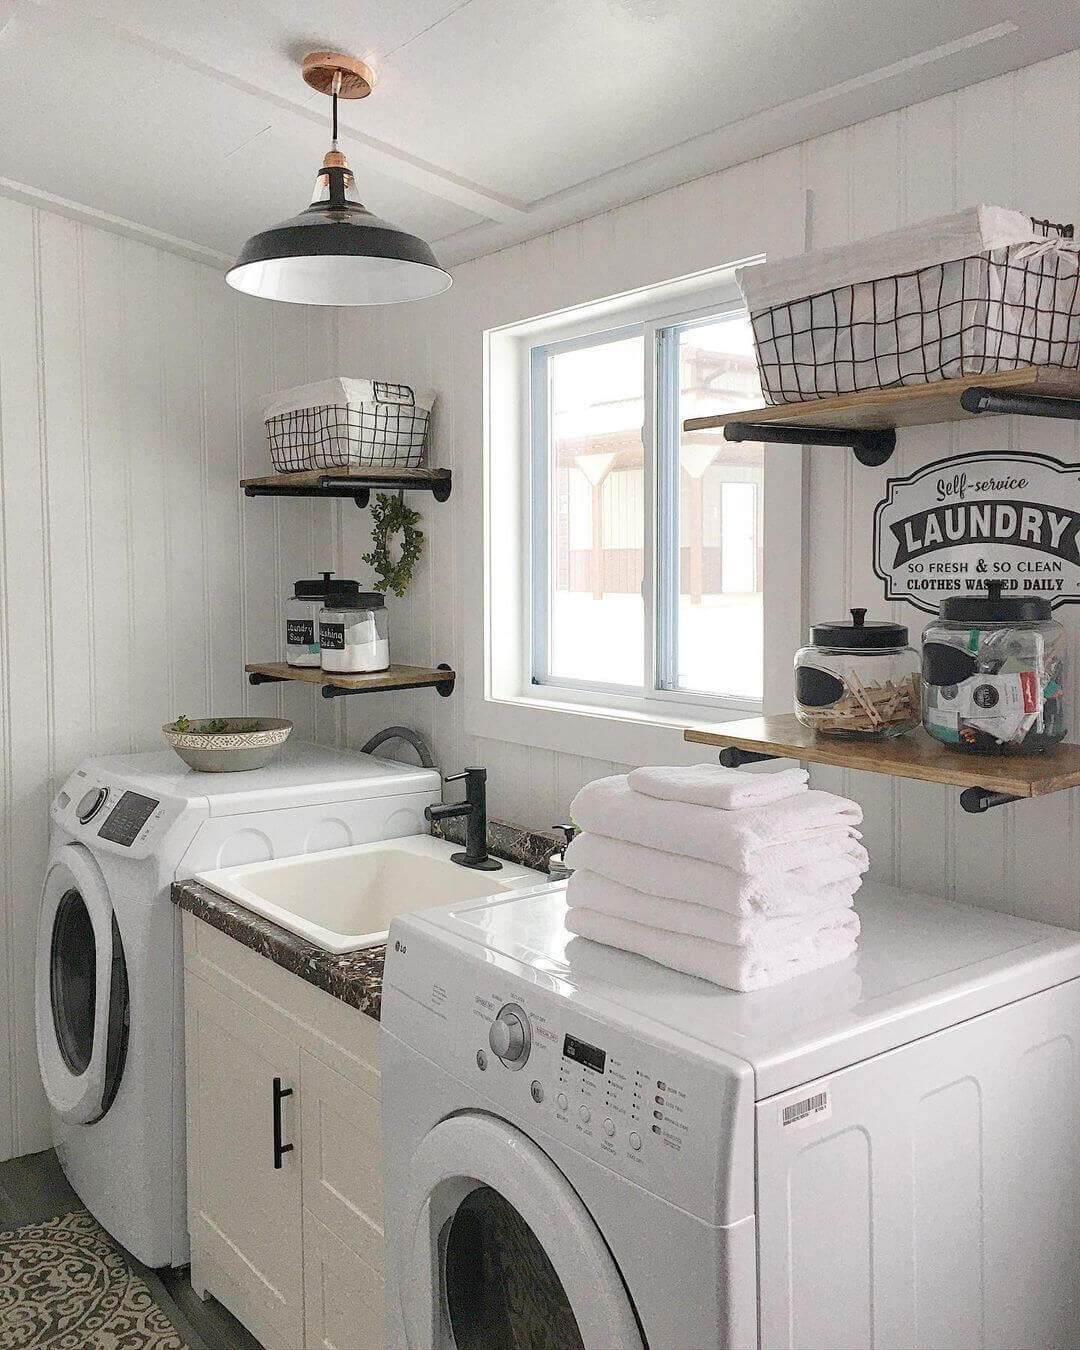 Can Laundry Room Be in the Middle of a House?